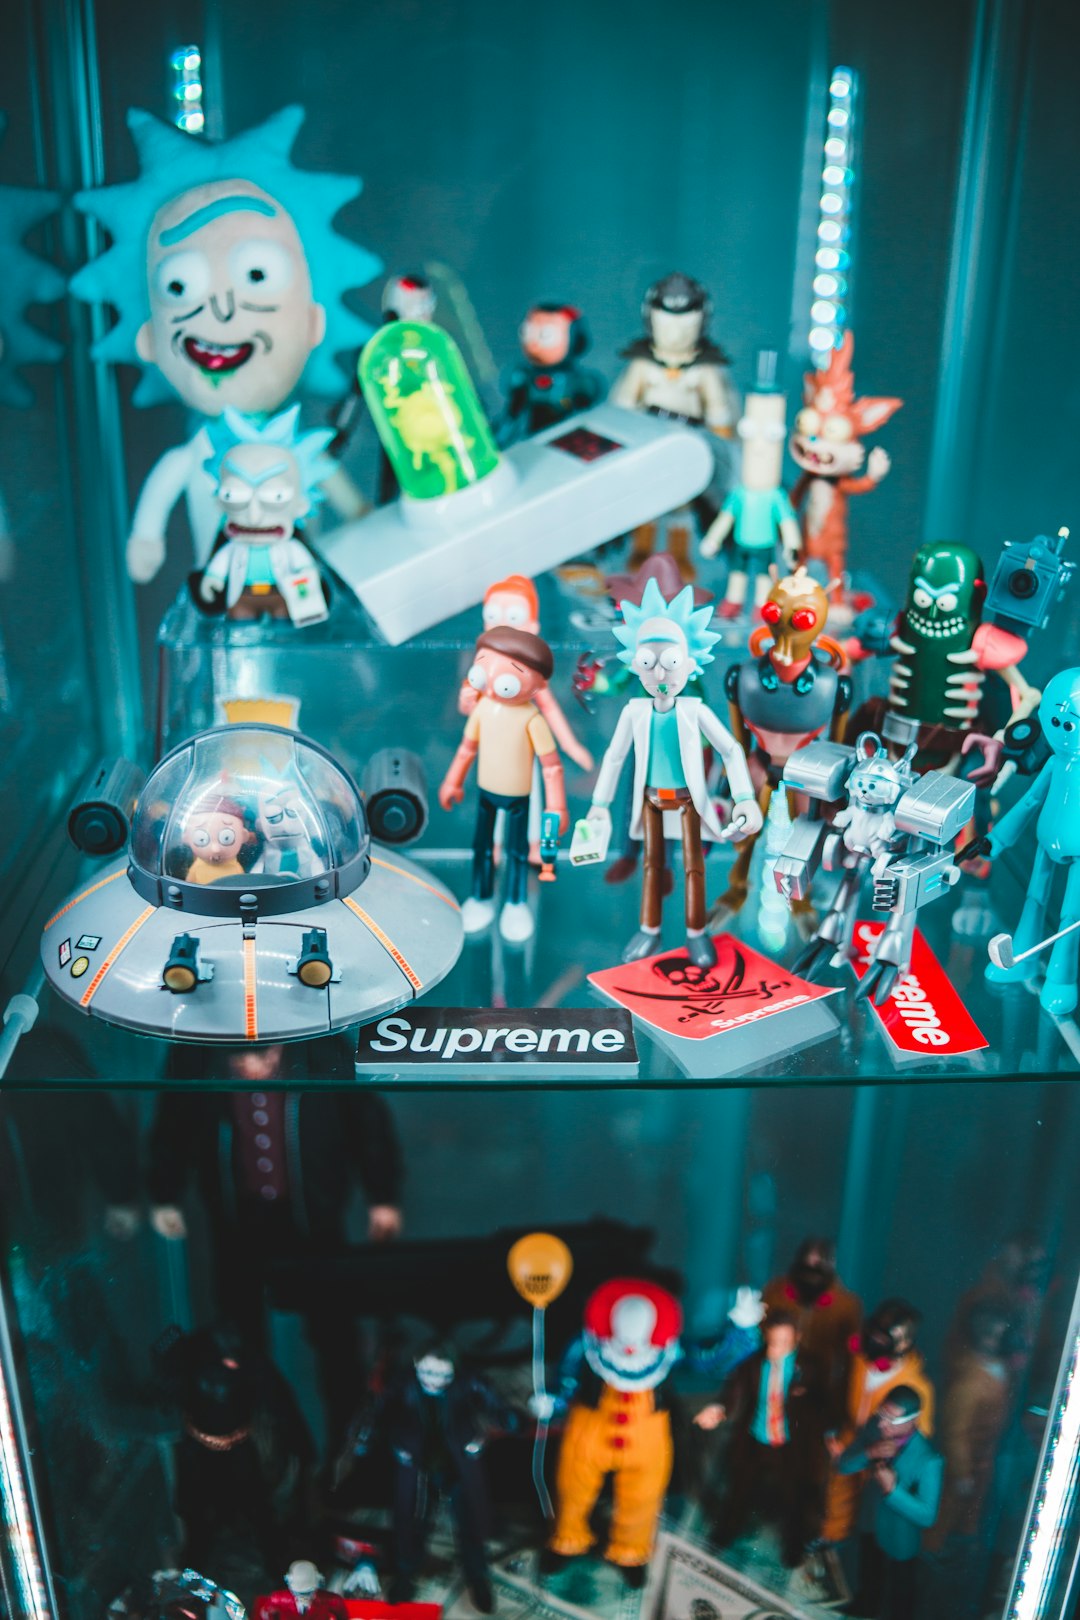 assorted anime character figurines